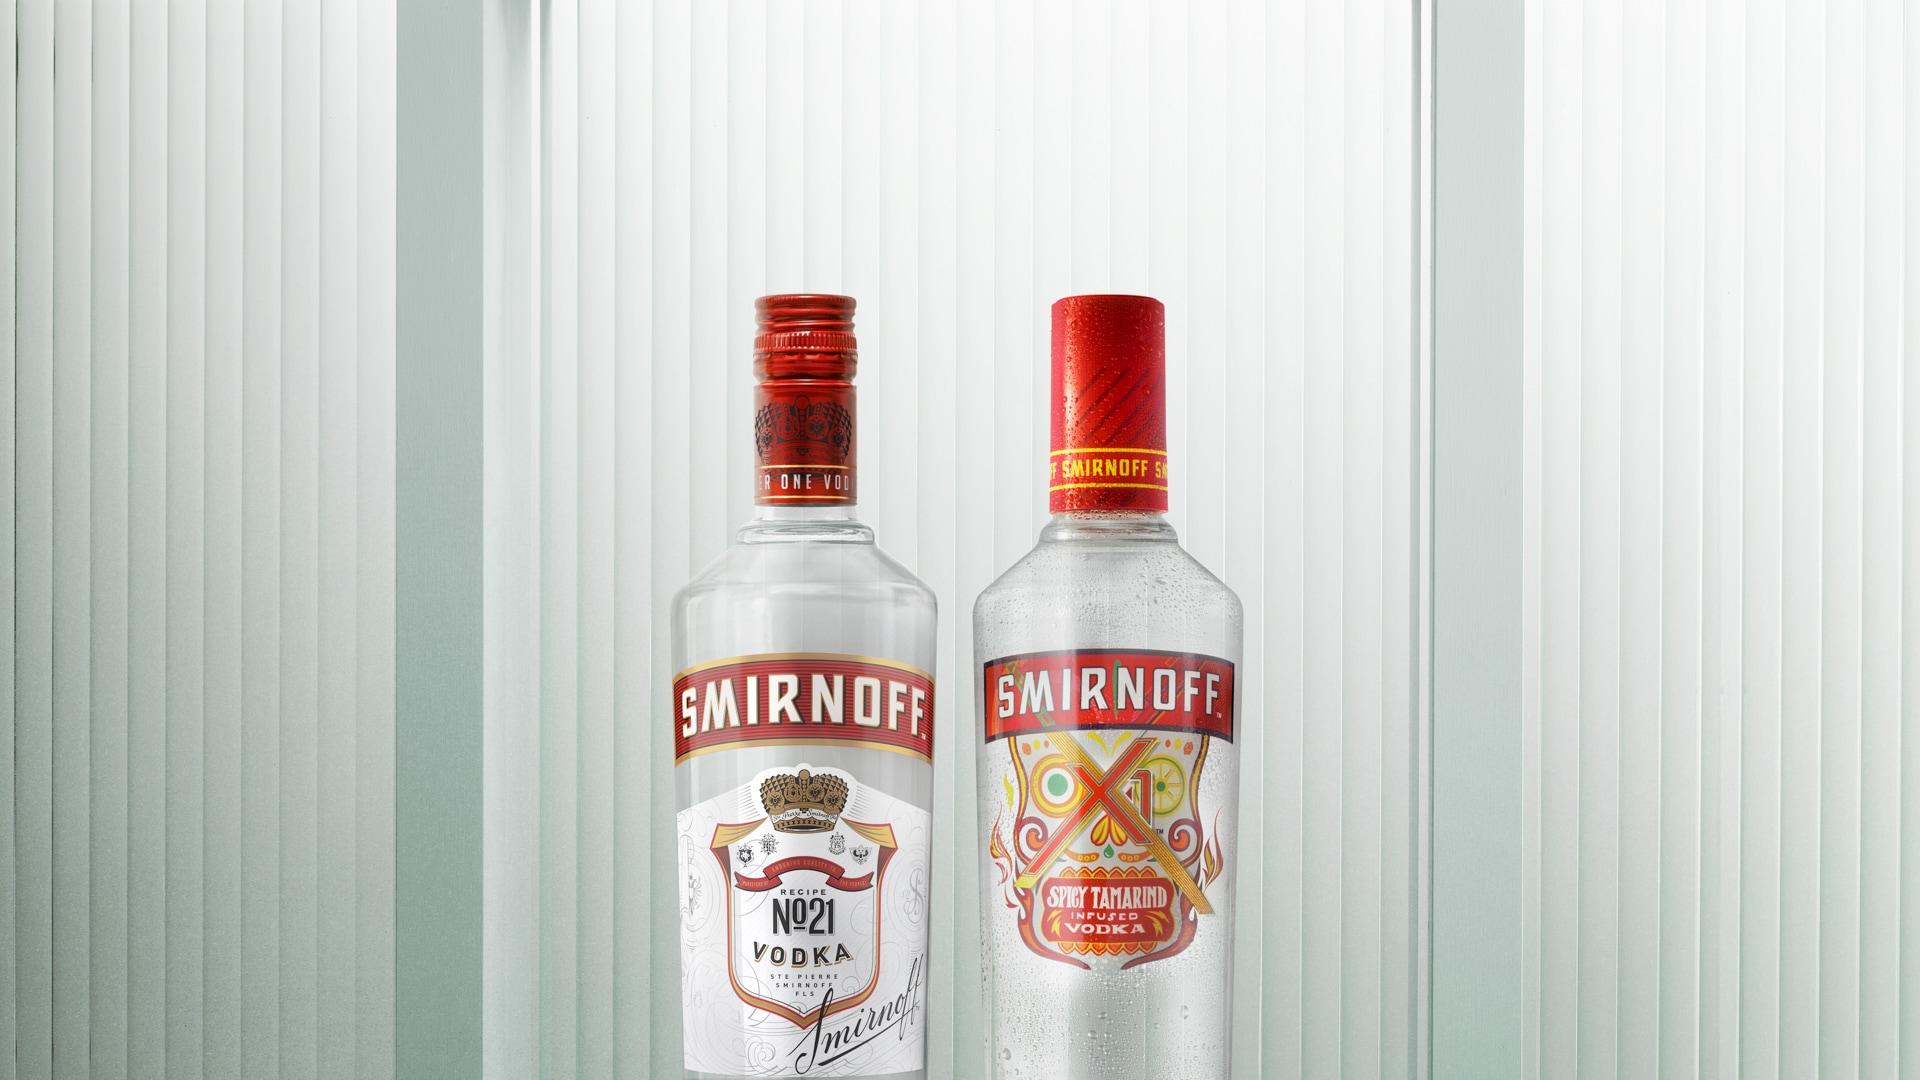 Mexico Smirnoff products